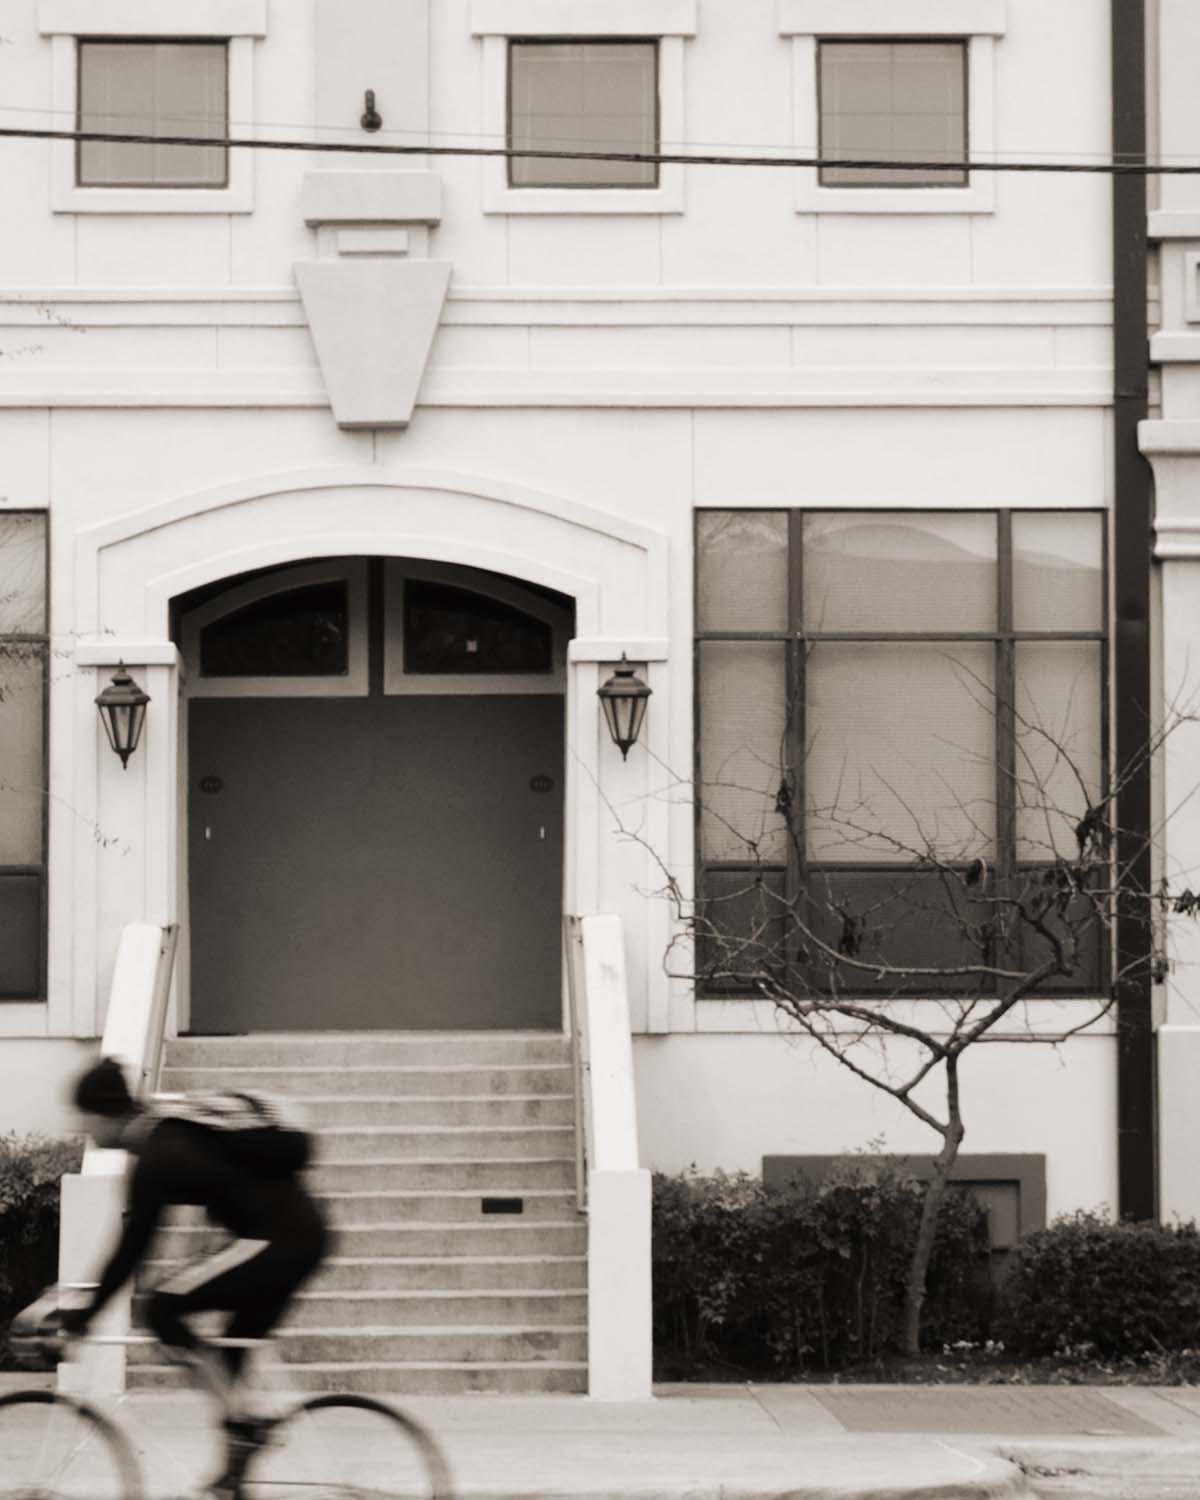 rider past a front stoop